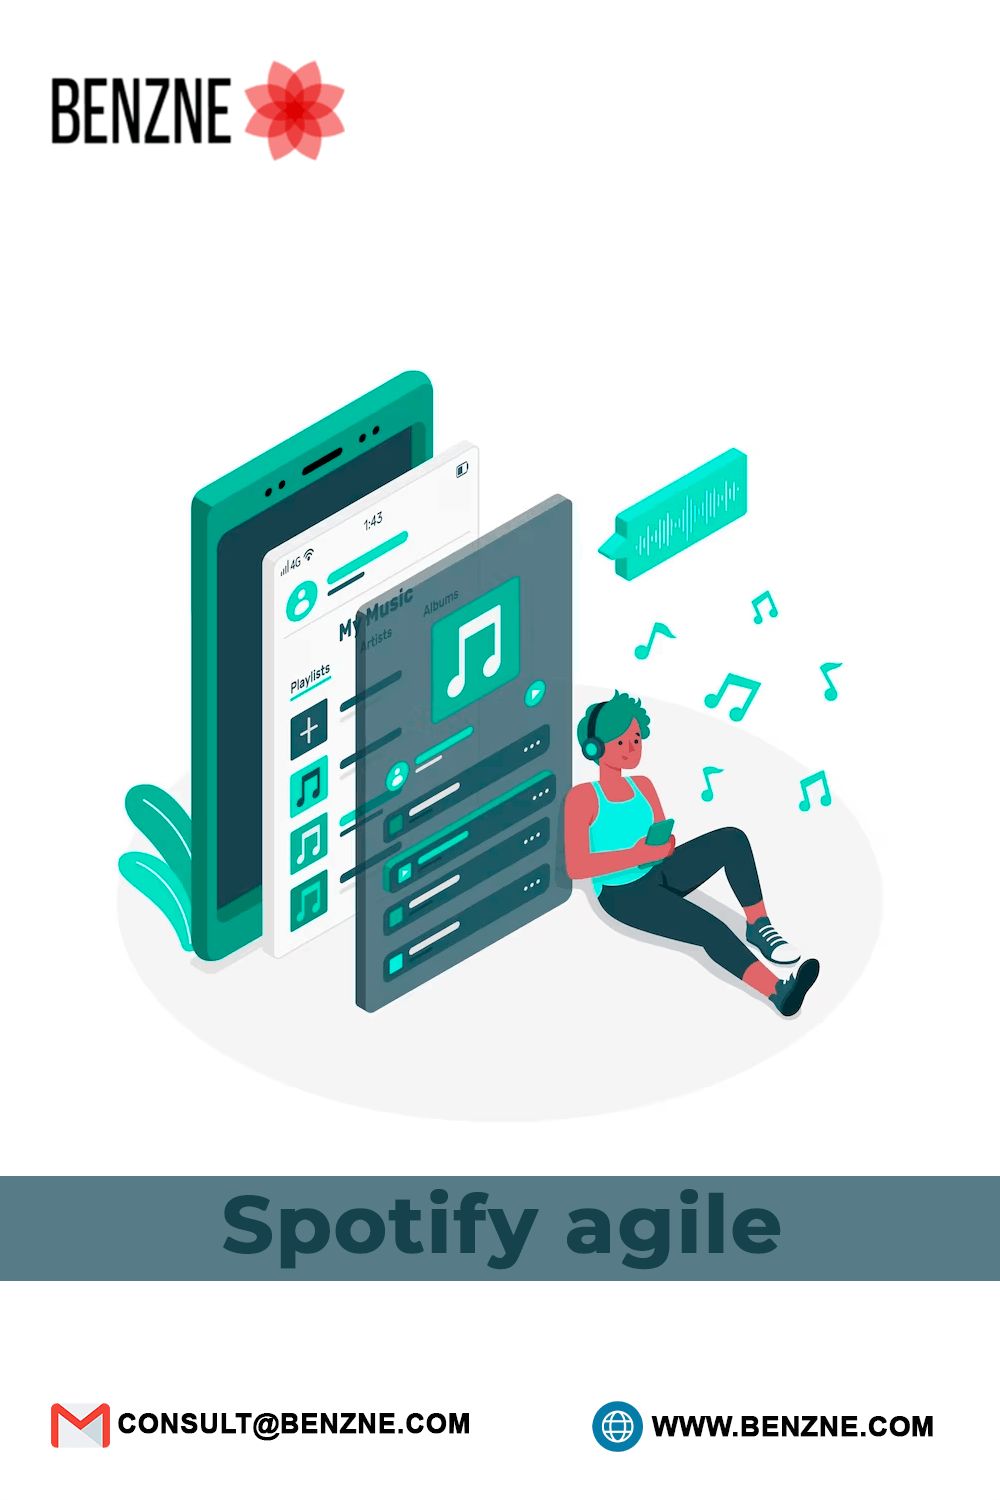 Get Benefits Of Implementation Of Spotify Agile With The Result-Driven Approach Of Benzne